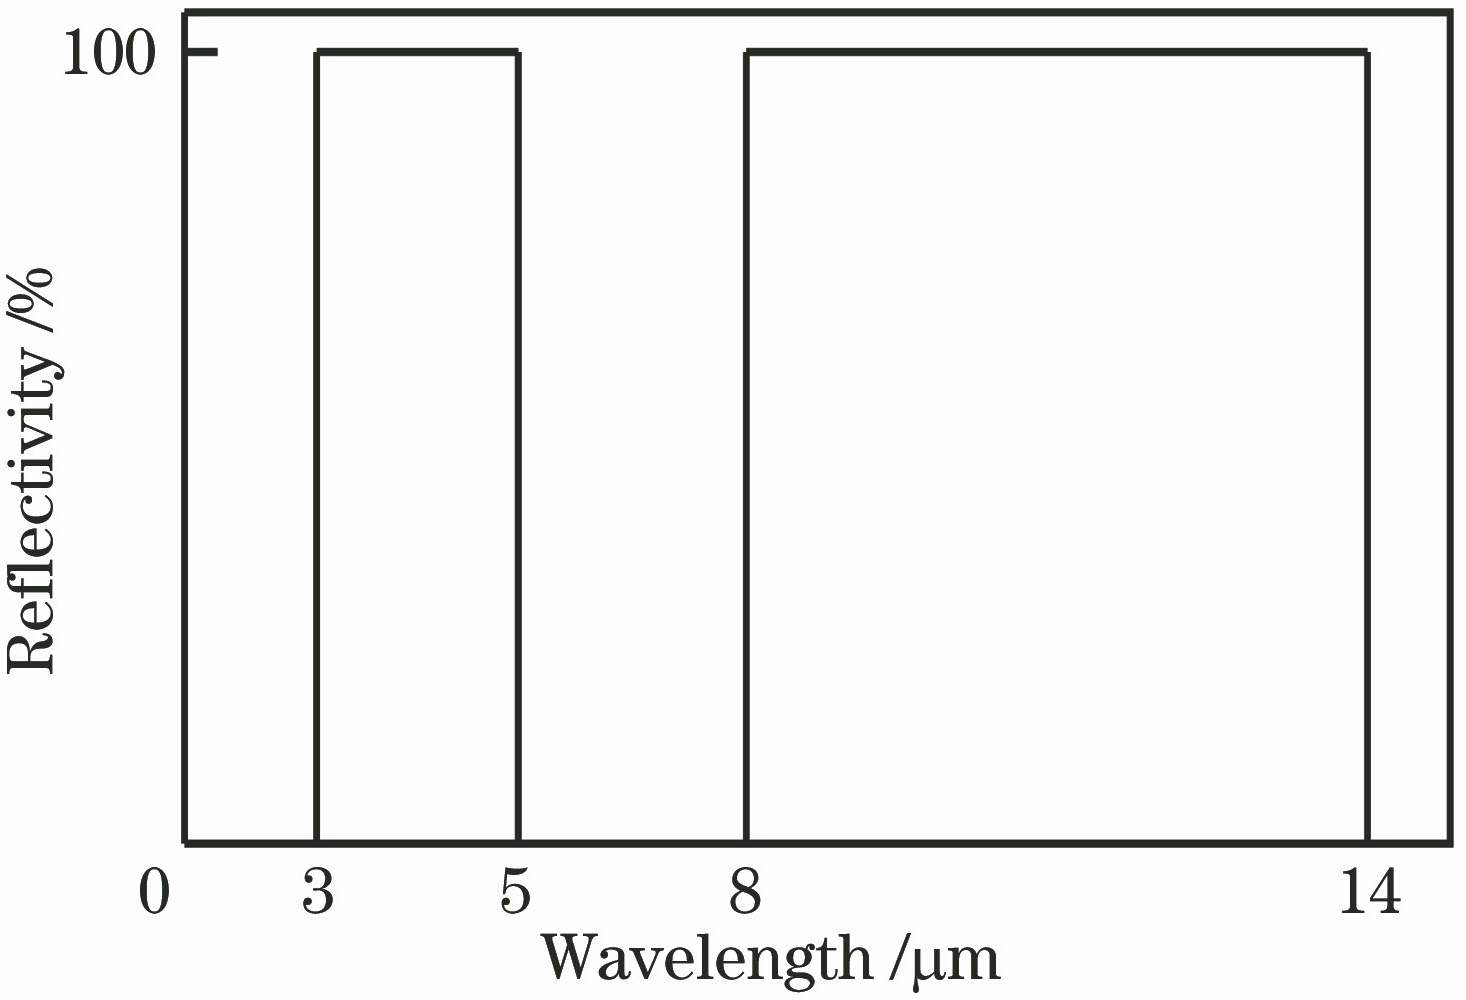 Ideal reflection curves of infrared stealthy materials